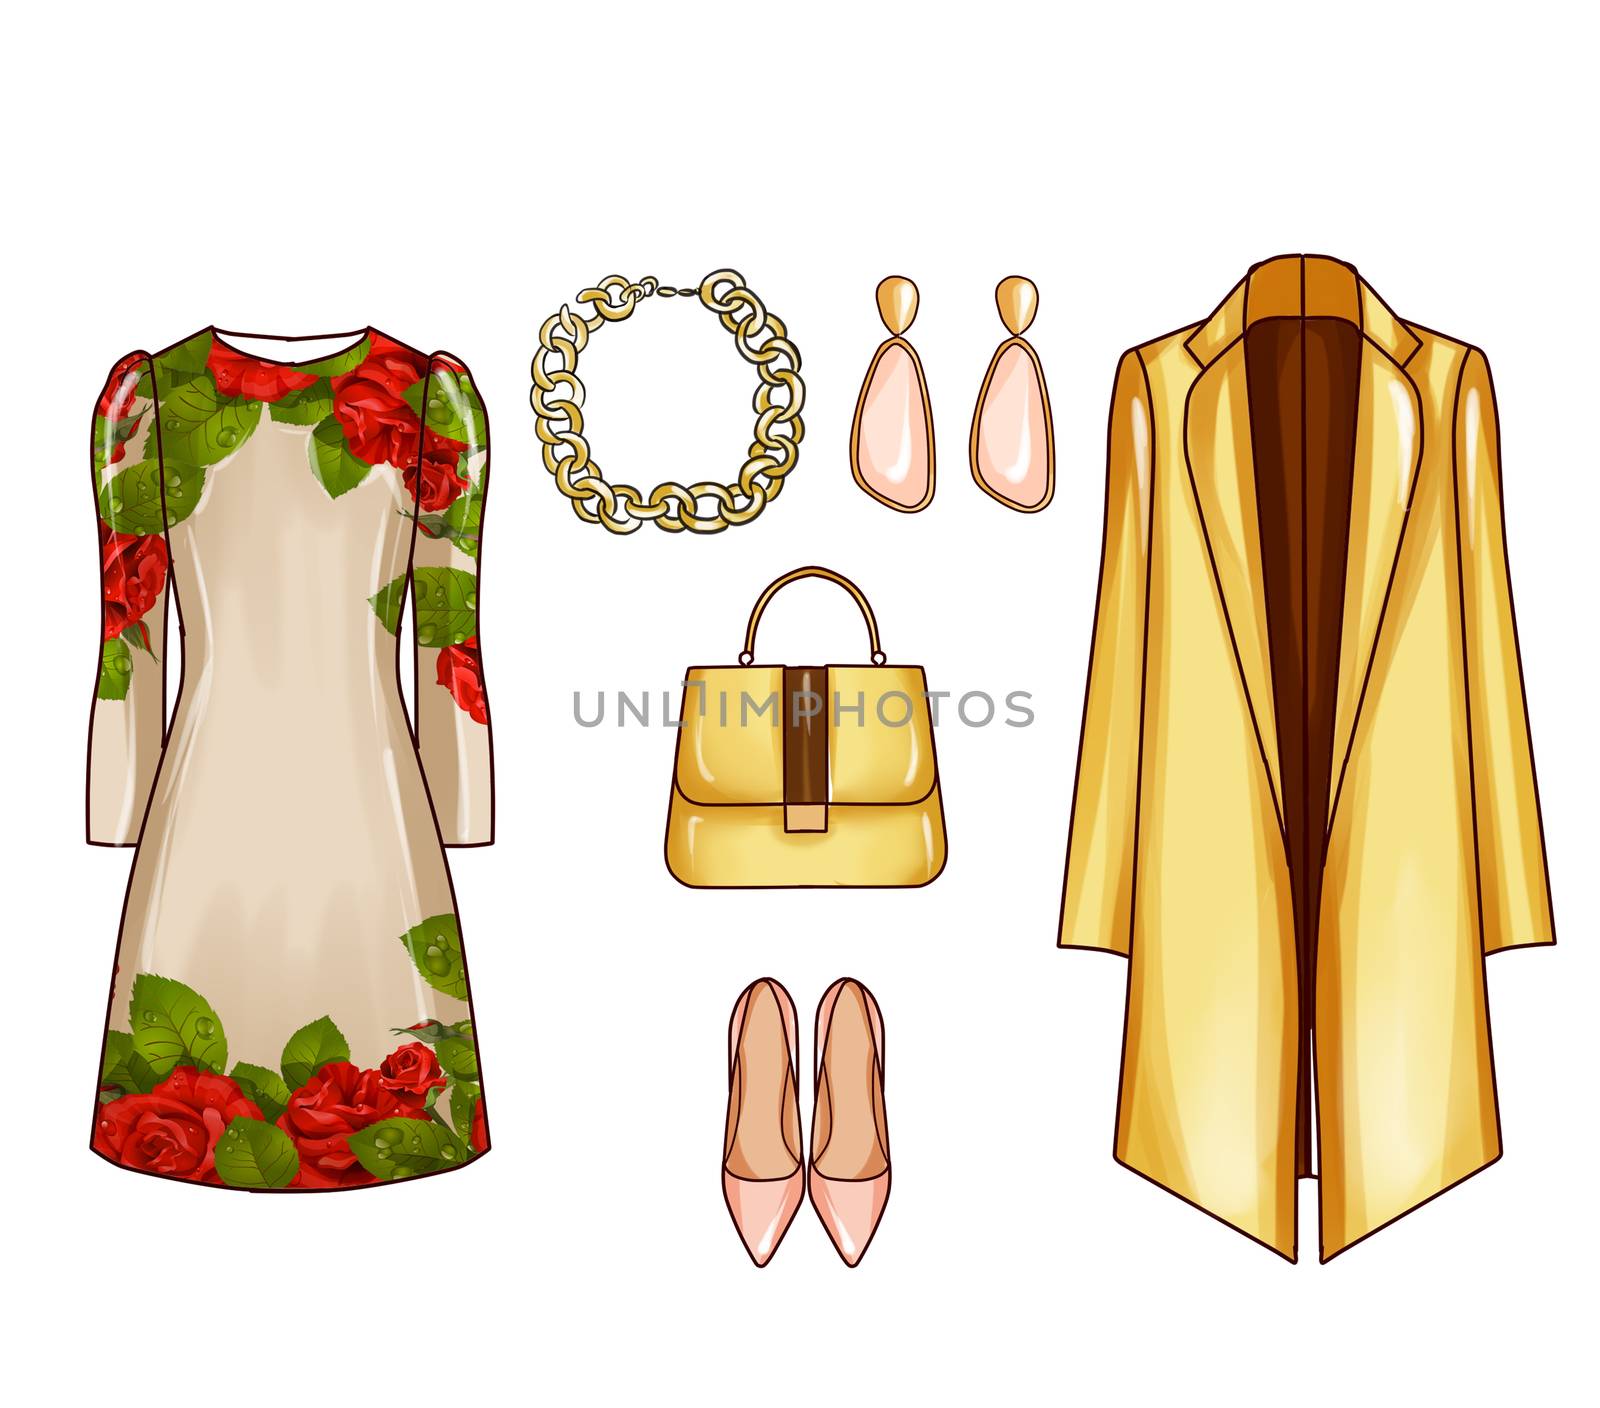 Fashion set of woman's clothes and accessories - Printed short dress, jewels, shoes, purse, , coat, by GGillustrations